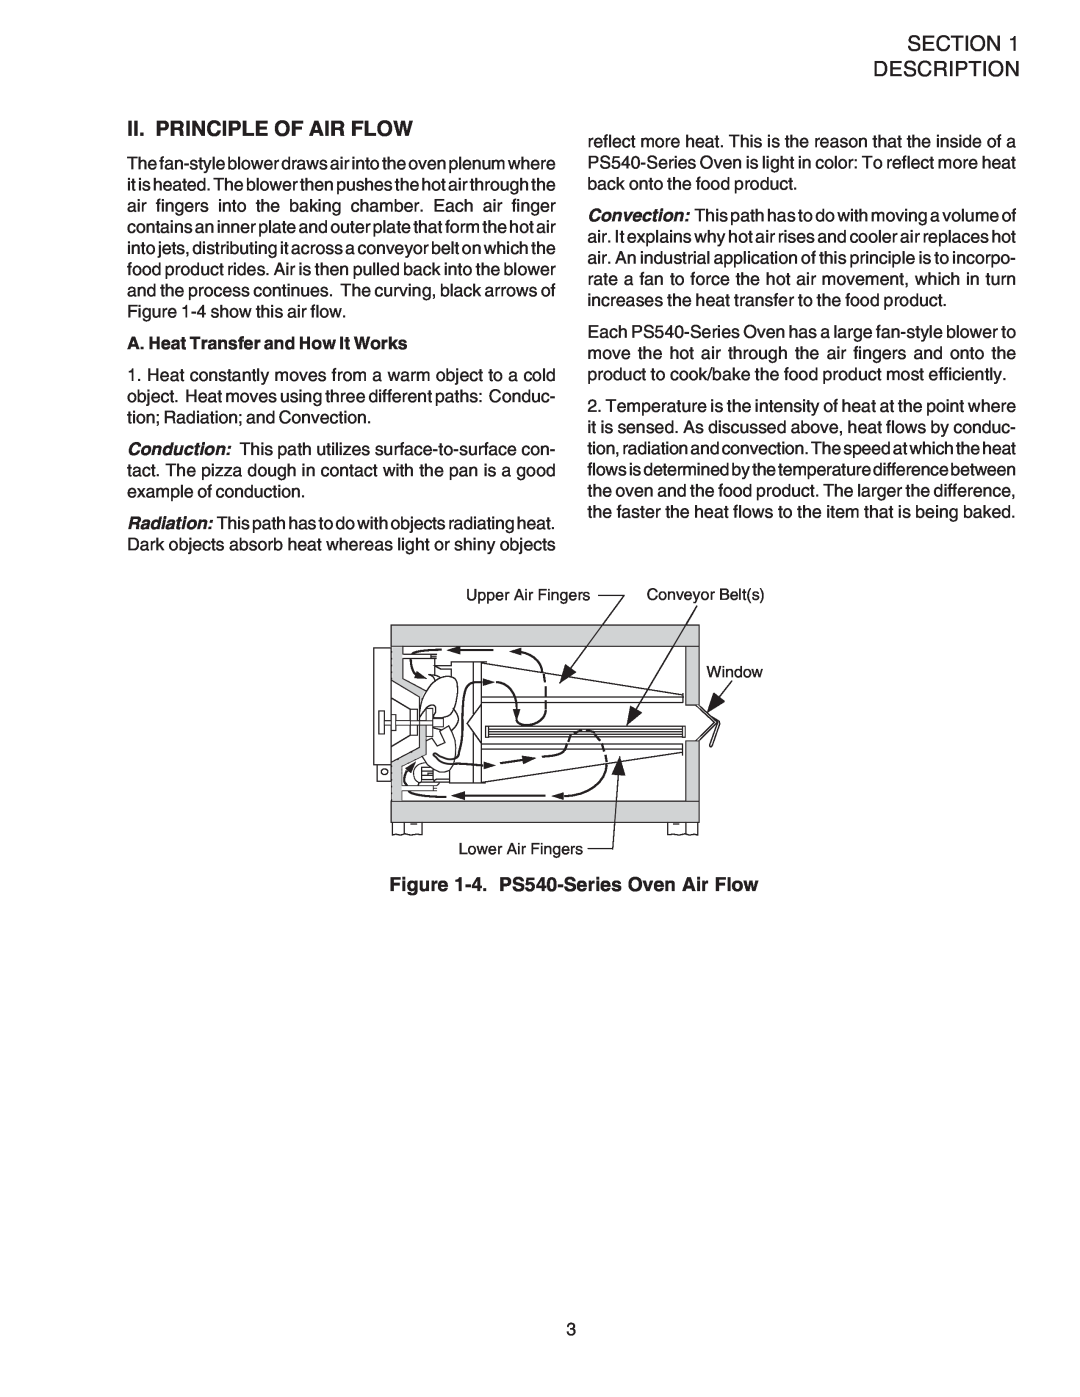 Middleby Marshall PS540G installation manual Ii. Principle Of Air Flow, Section Description, 4. PS540-Series Oven Air Flow 